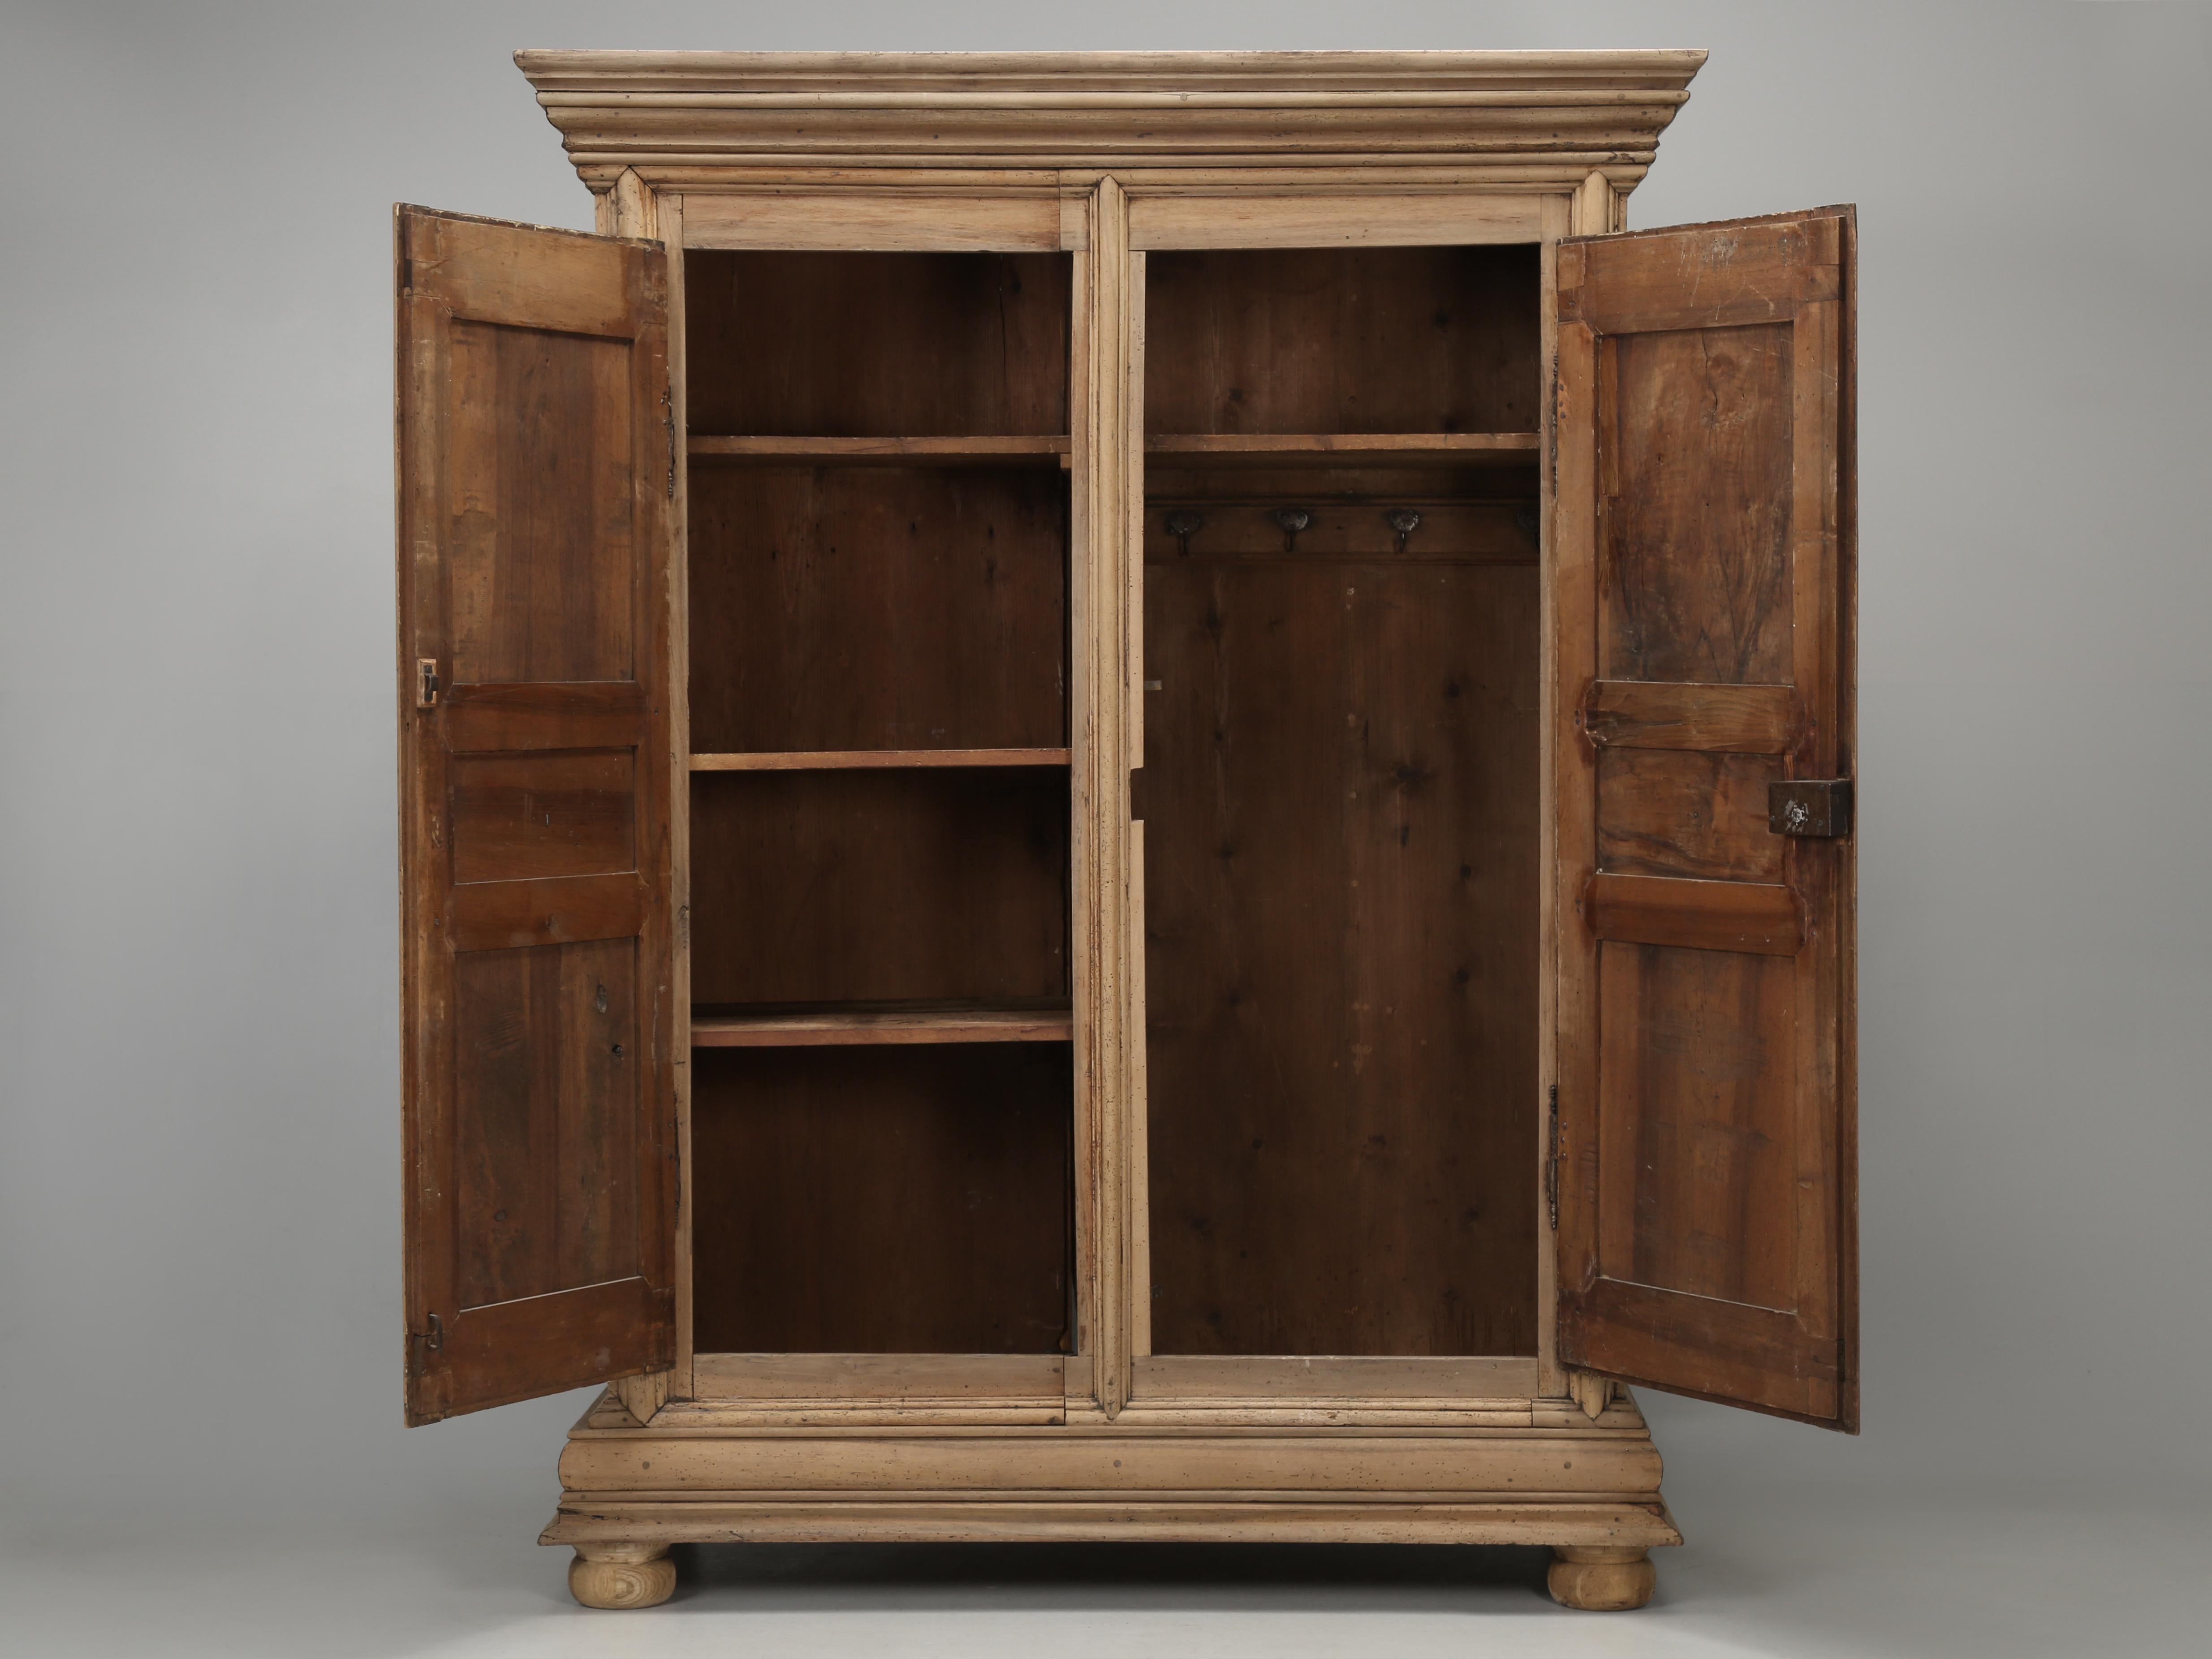 Antique French Armoire in Natural Washed Walnut Very Original Over 300-Years Old 8